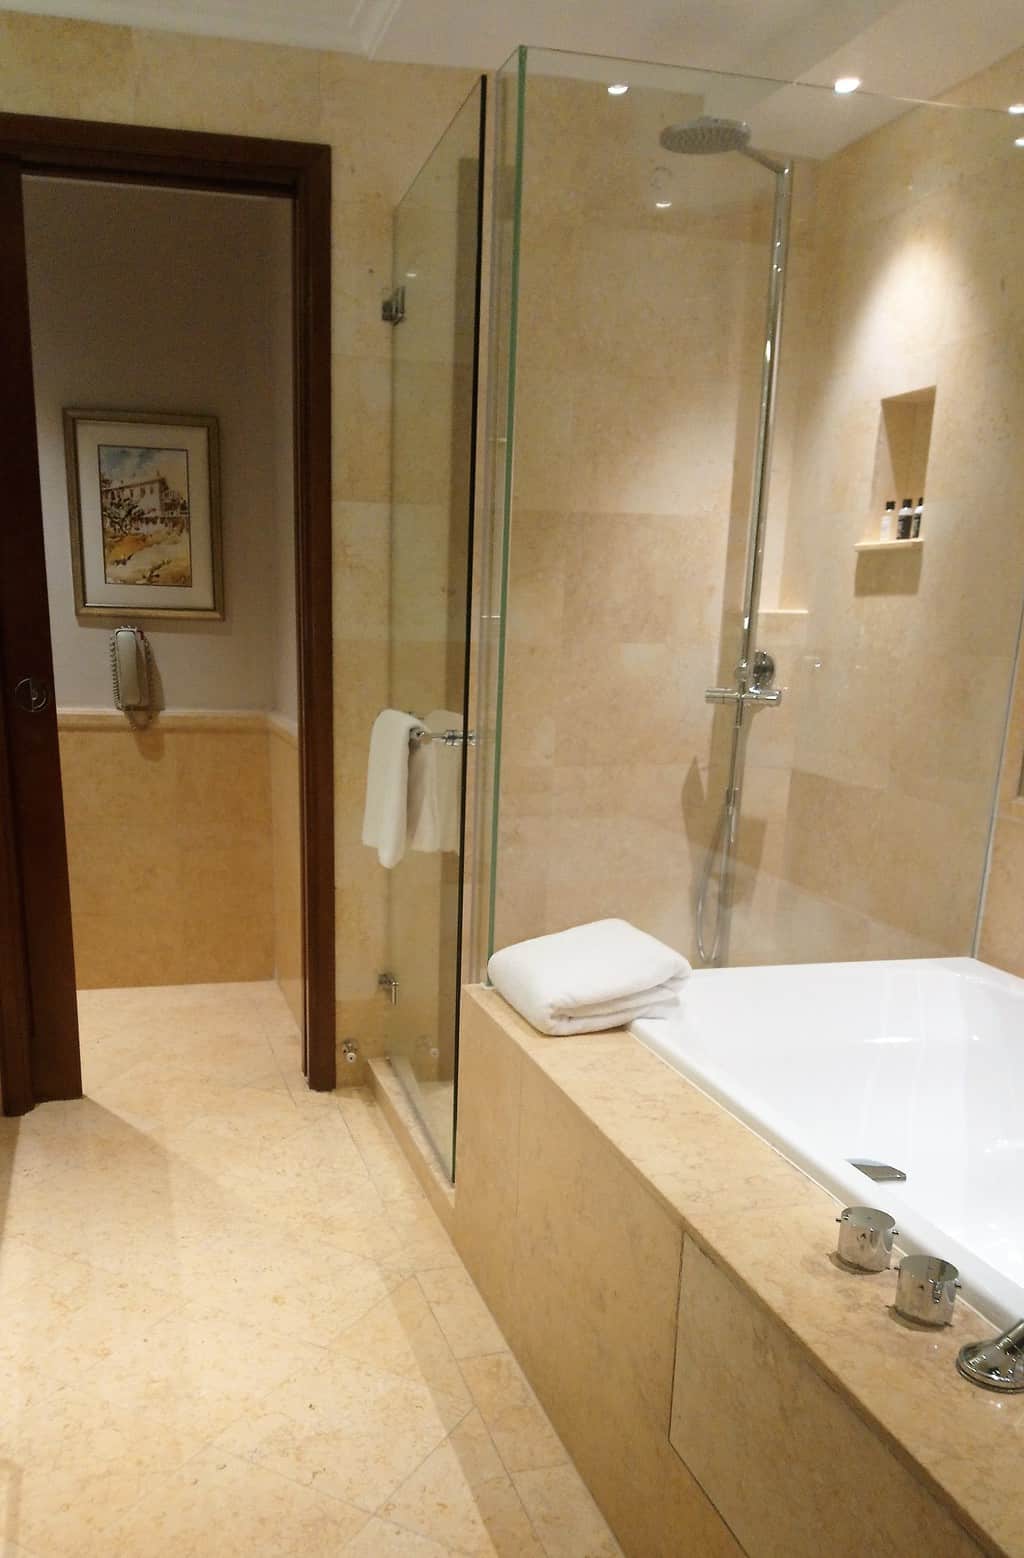 View of the bath and shower in the bathroom of a Premier Courtyard Room at The Fullerton Hotel in Singapore